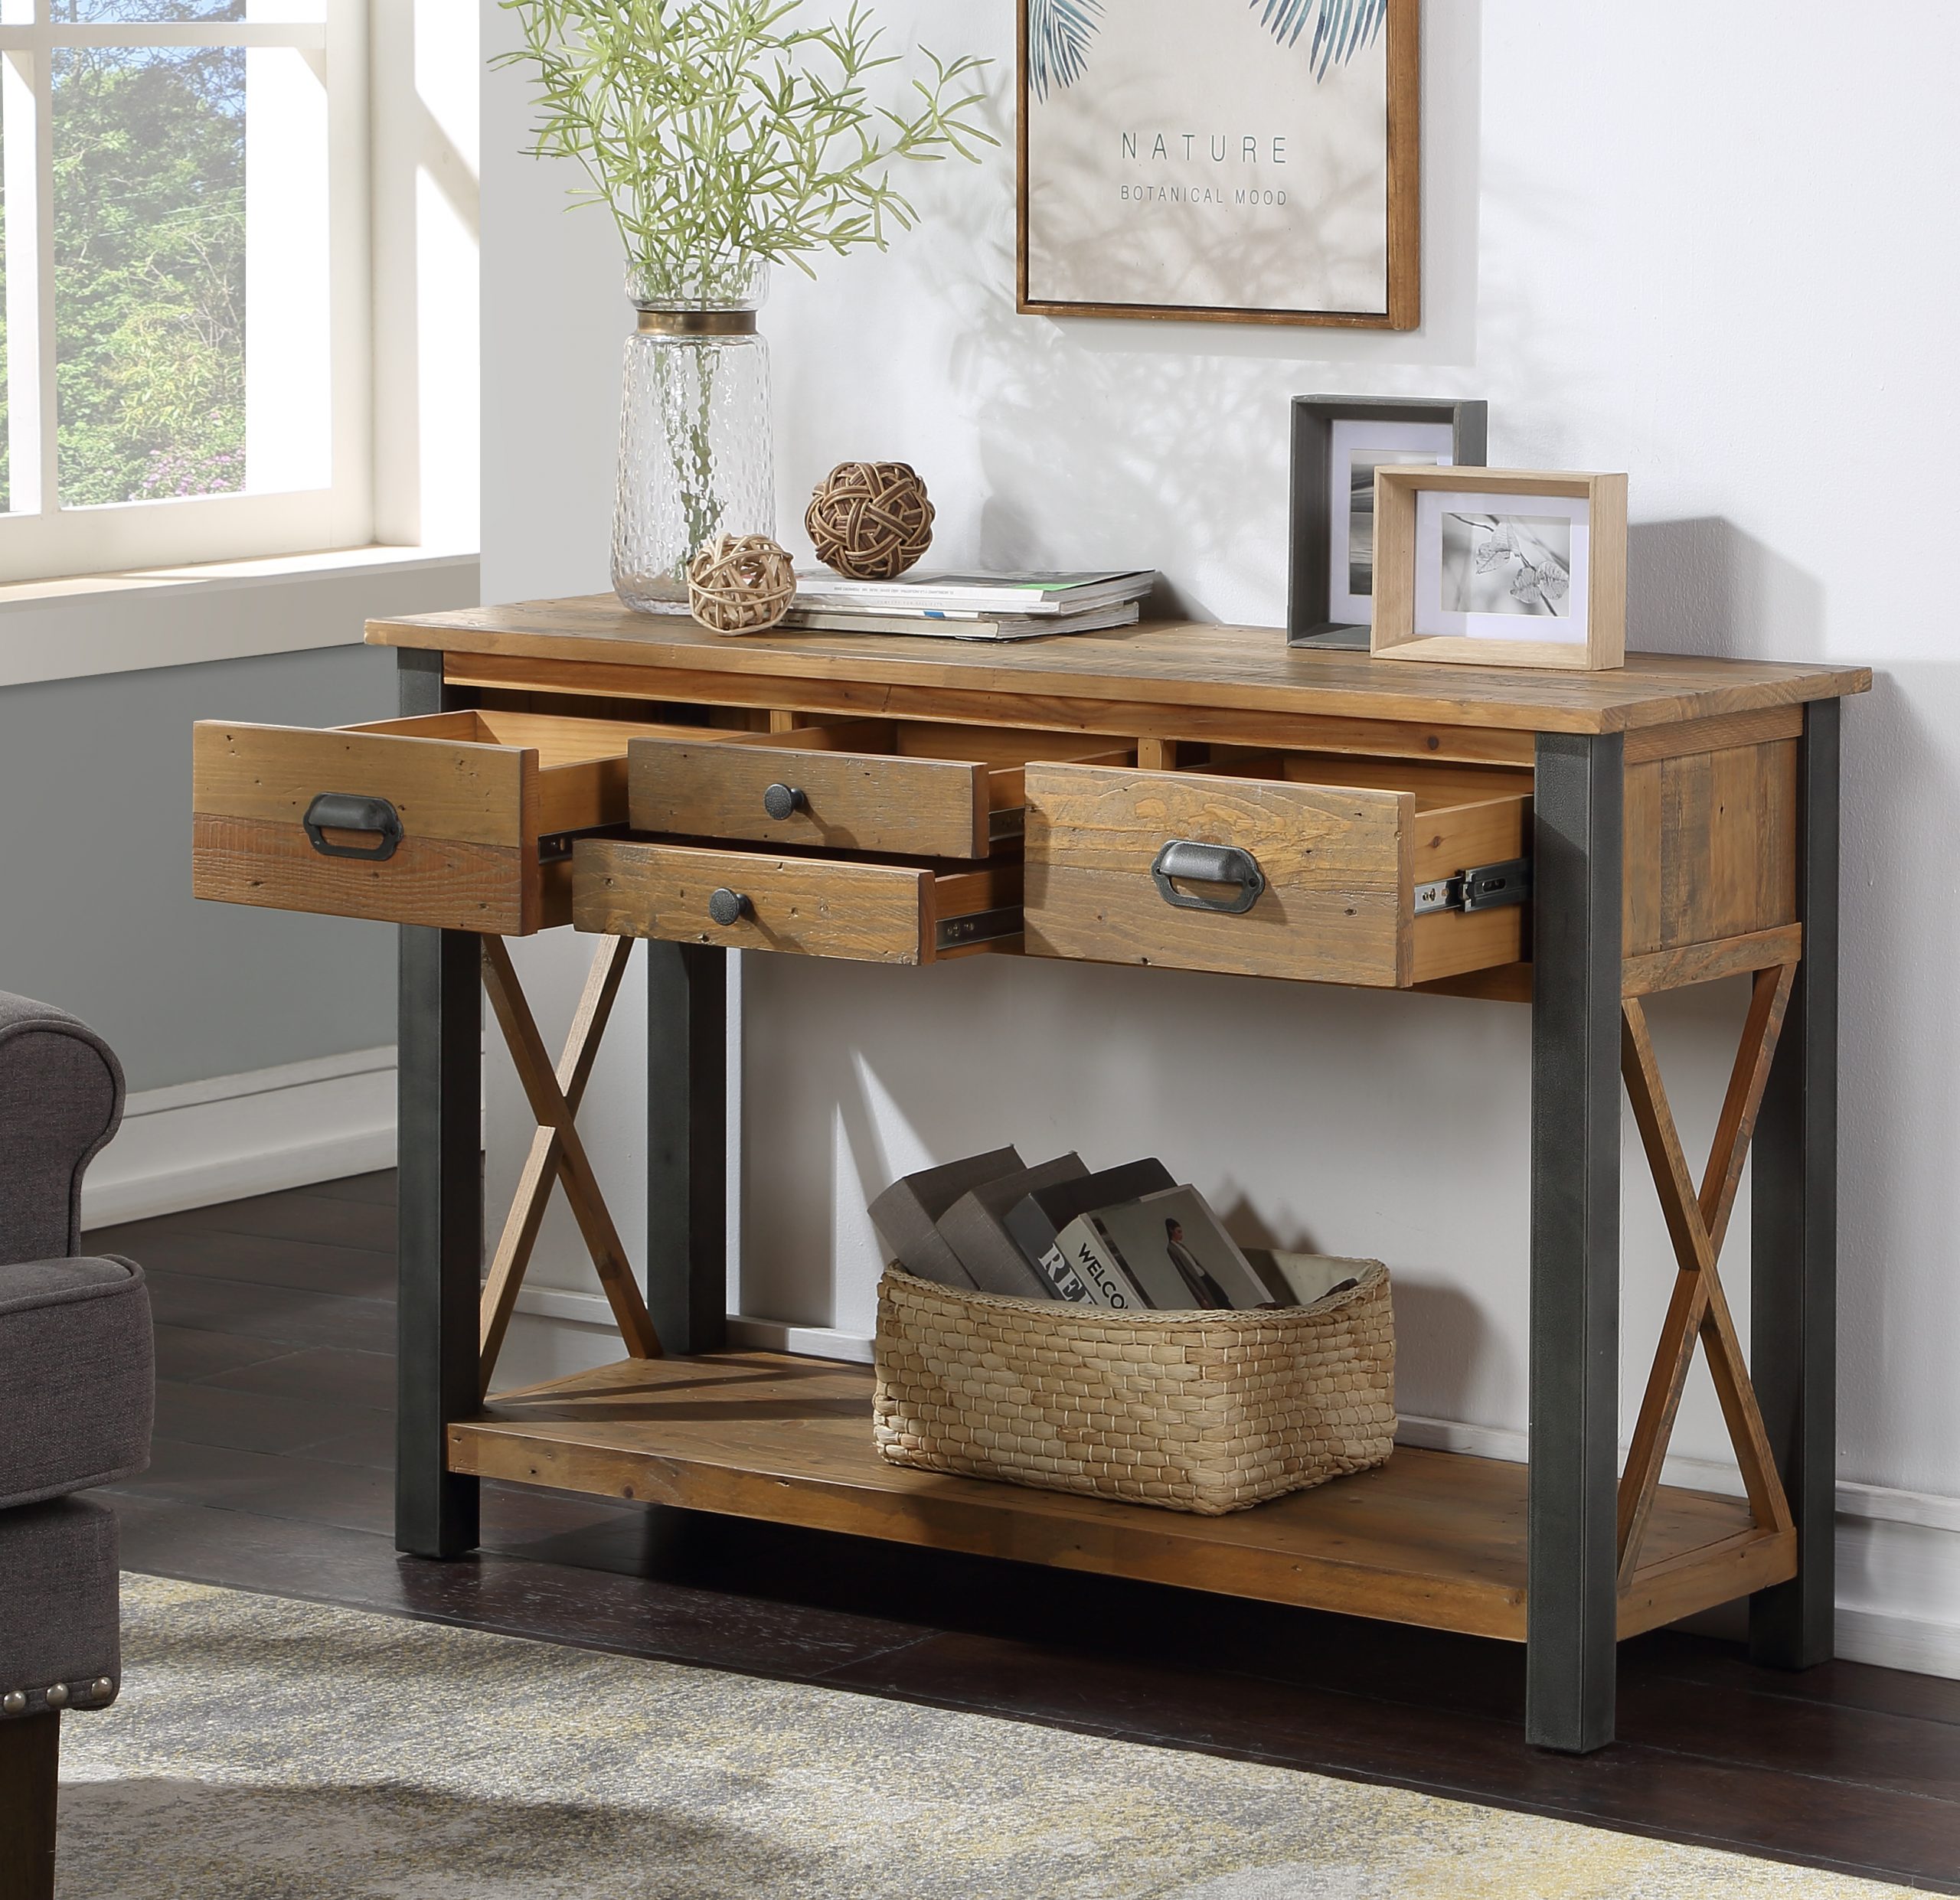 wqide console table with four drawers - open